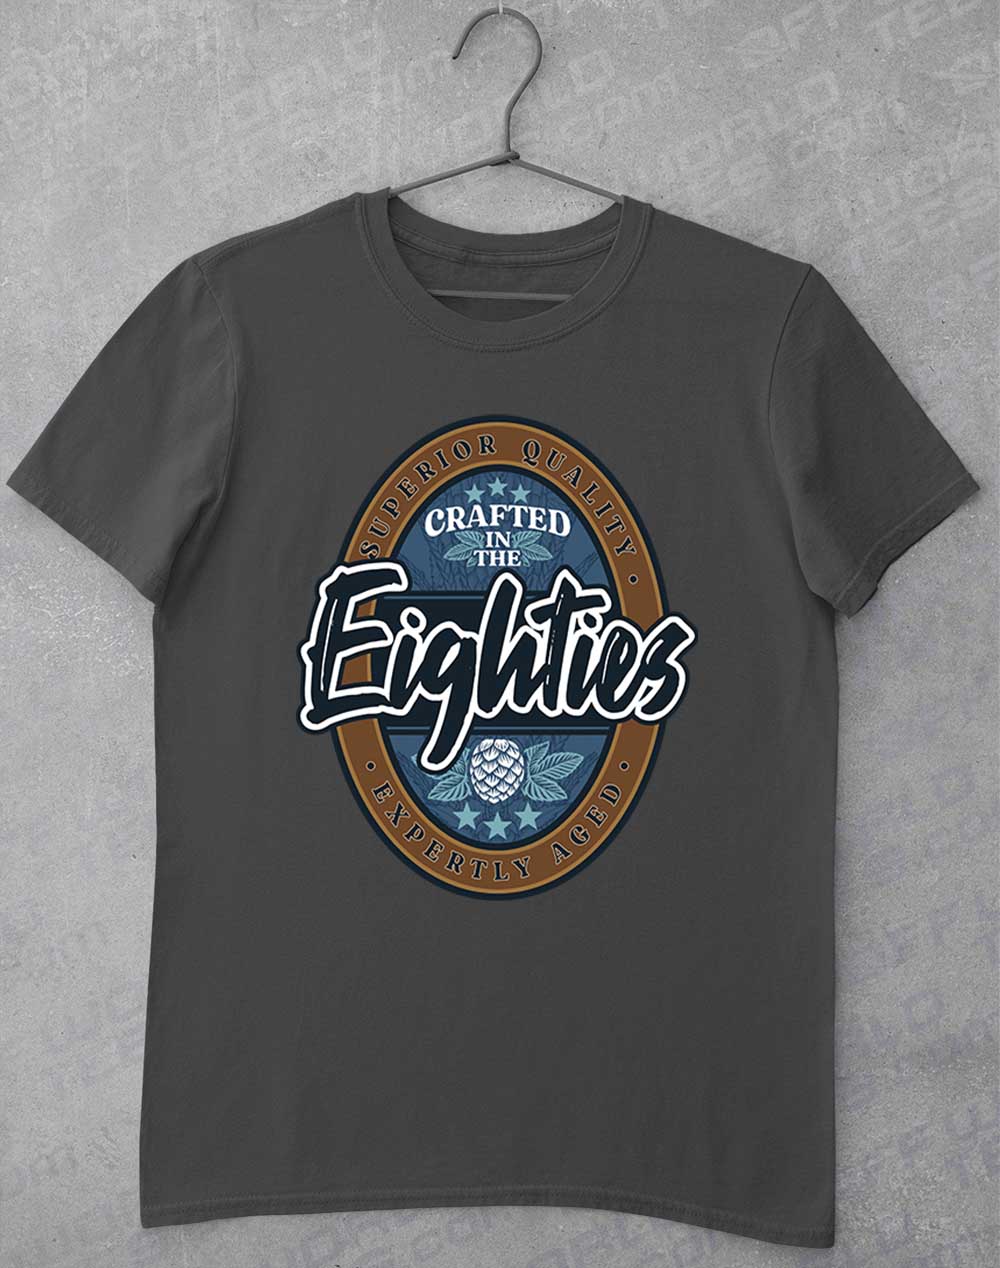 Crafted in the Eighties T-Shirt